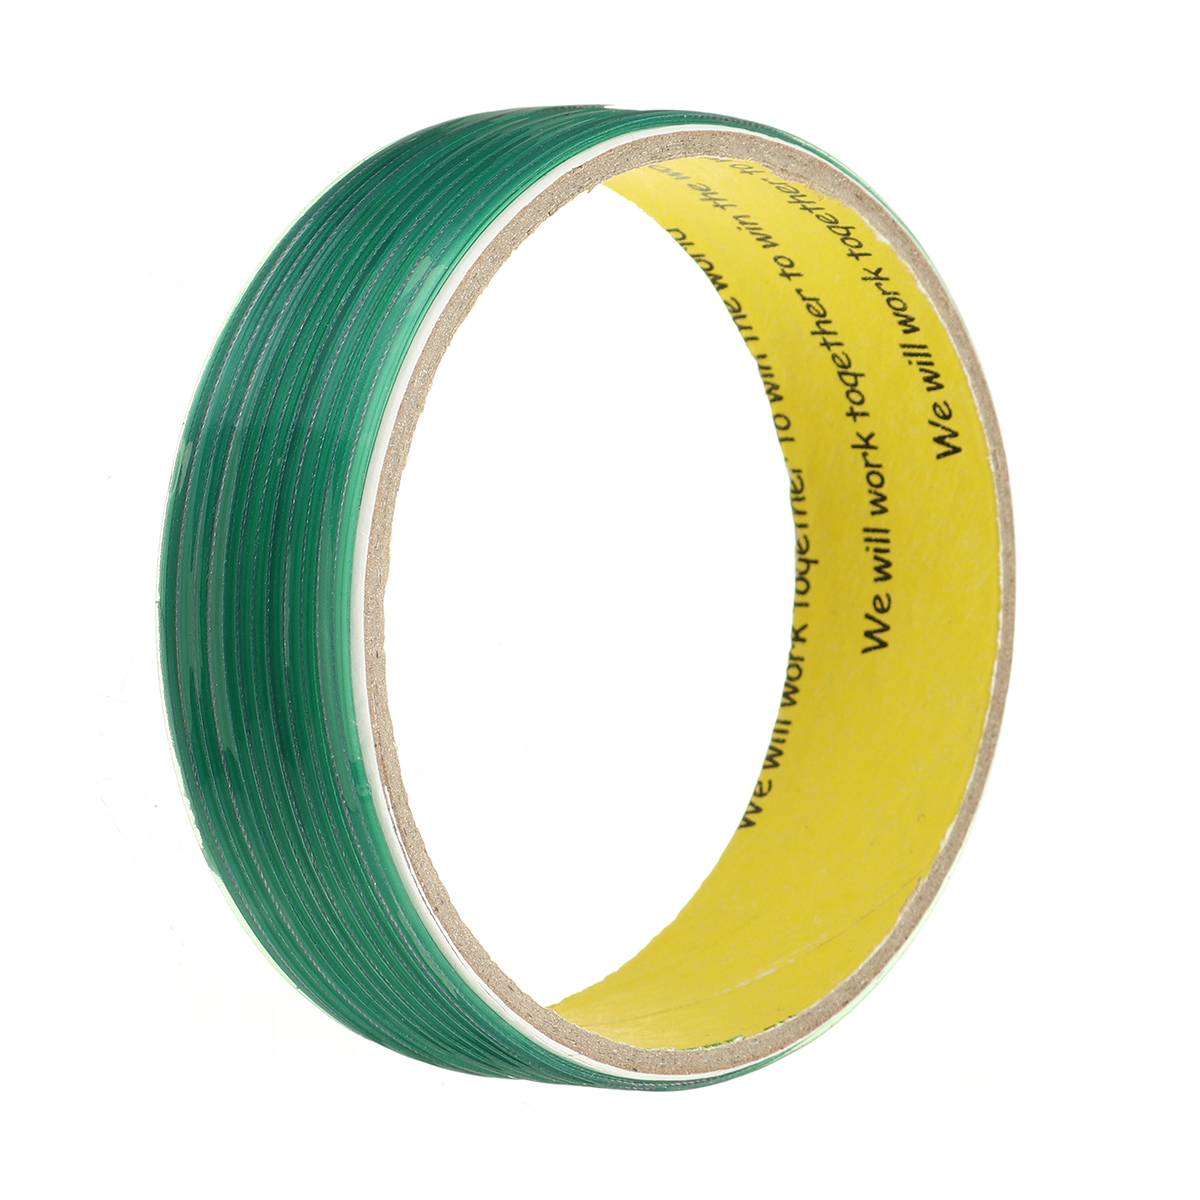 5101550m-Finish-Line-Tape-Wrapping-Vinyl-Films-Decals-Rolls-Wrap-Tape-1701004-3